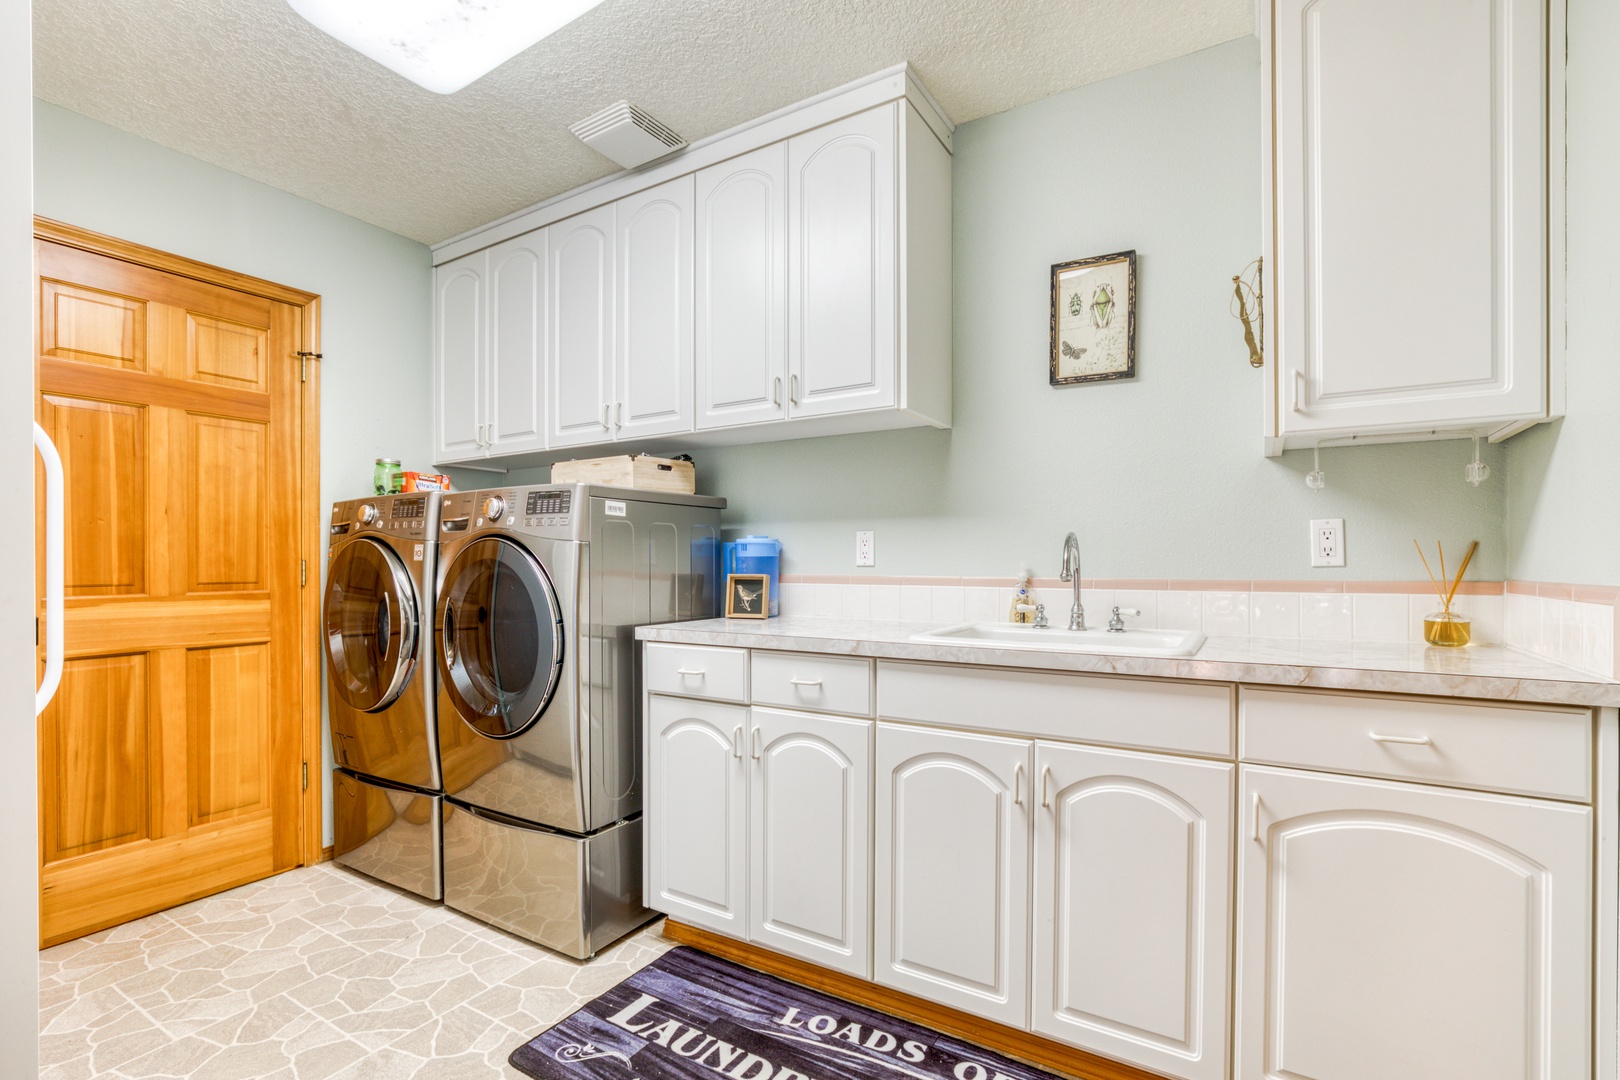 Sandy Vacation Rentals, Iron Mountain - Laundry room with washer and dryer